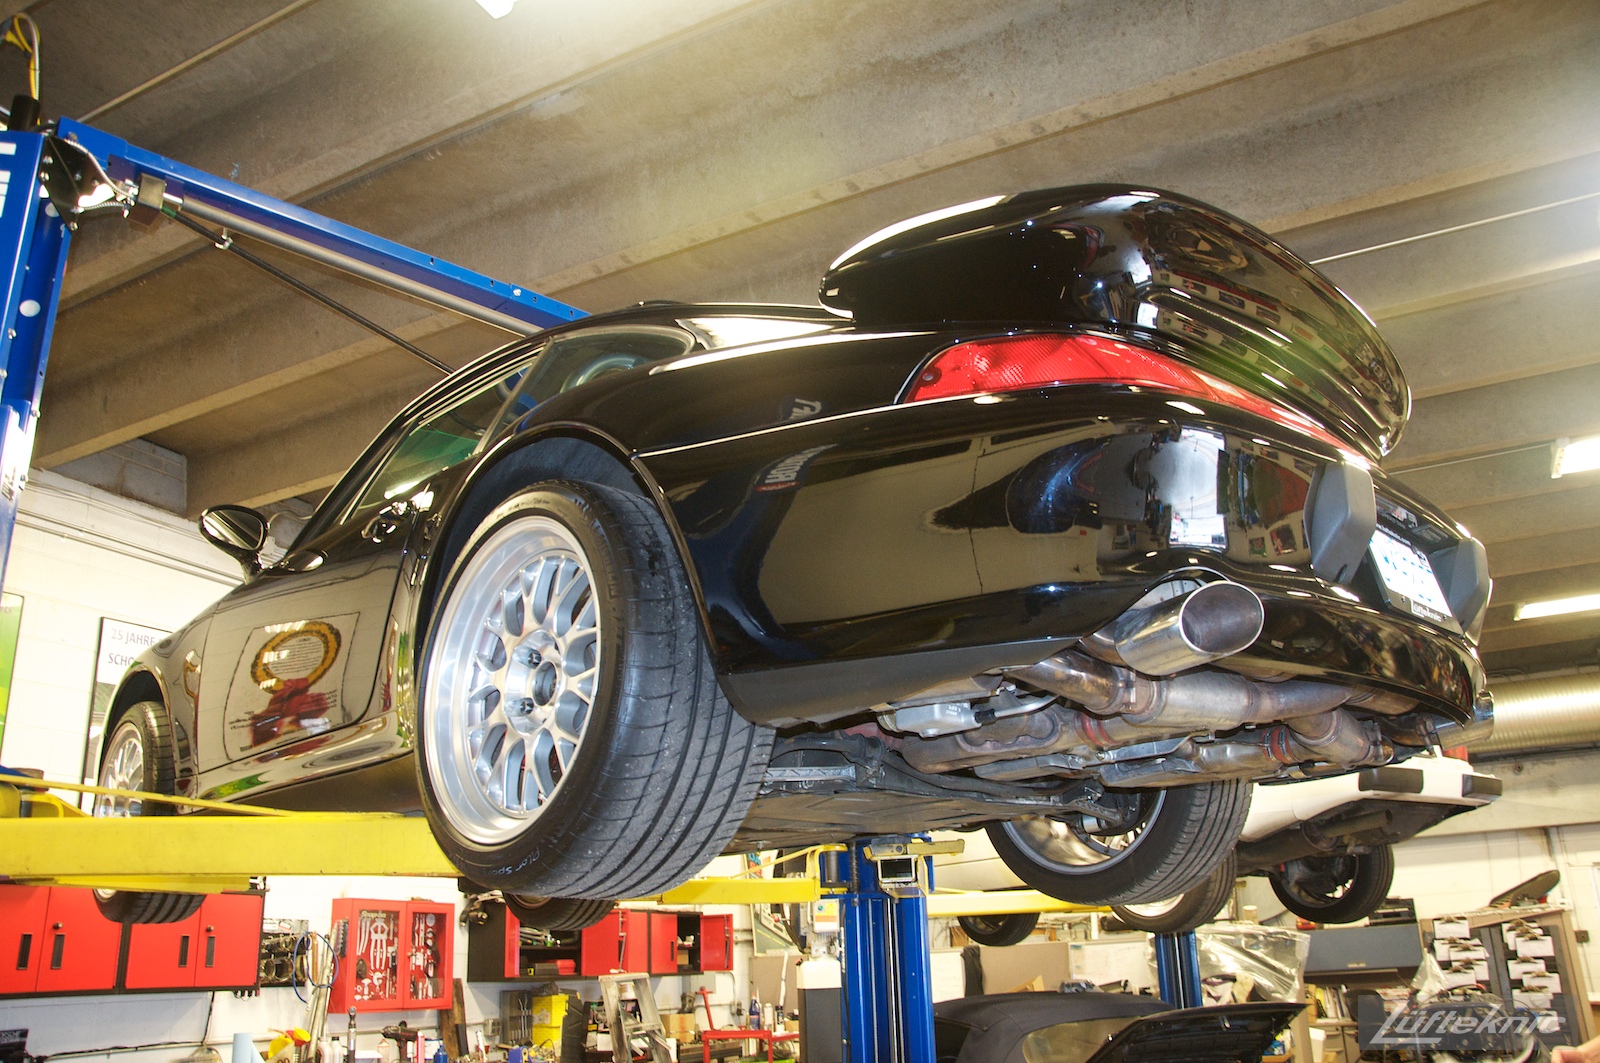 A 993 GT2 turbo conversion sits on a lift.